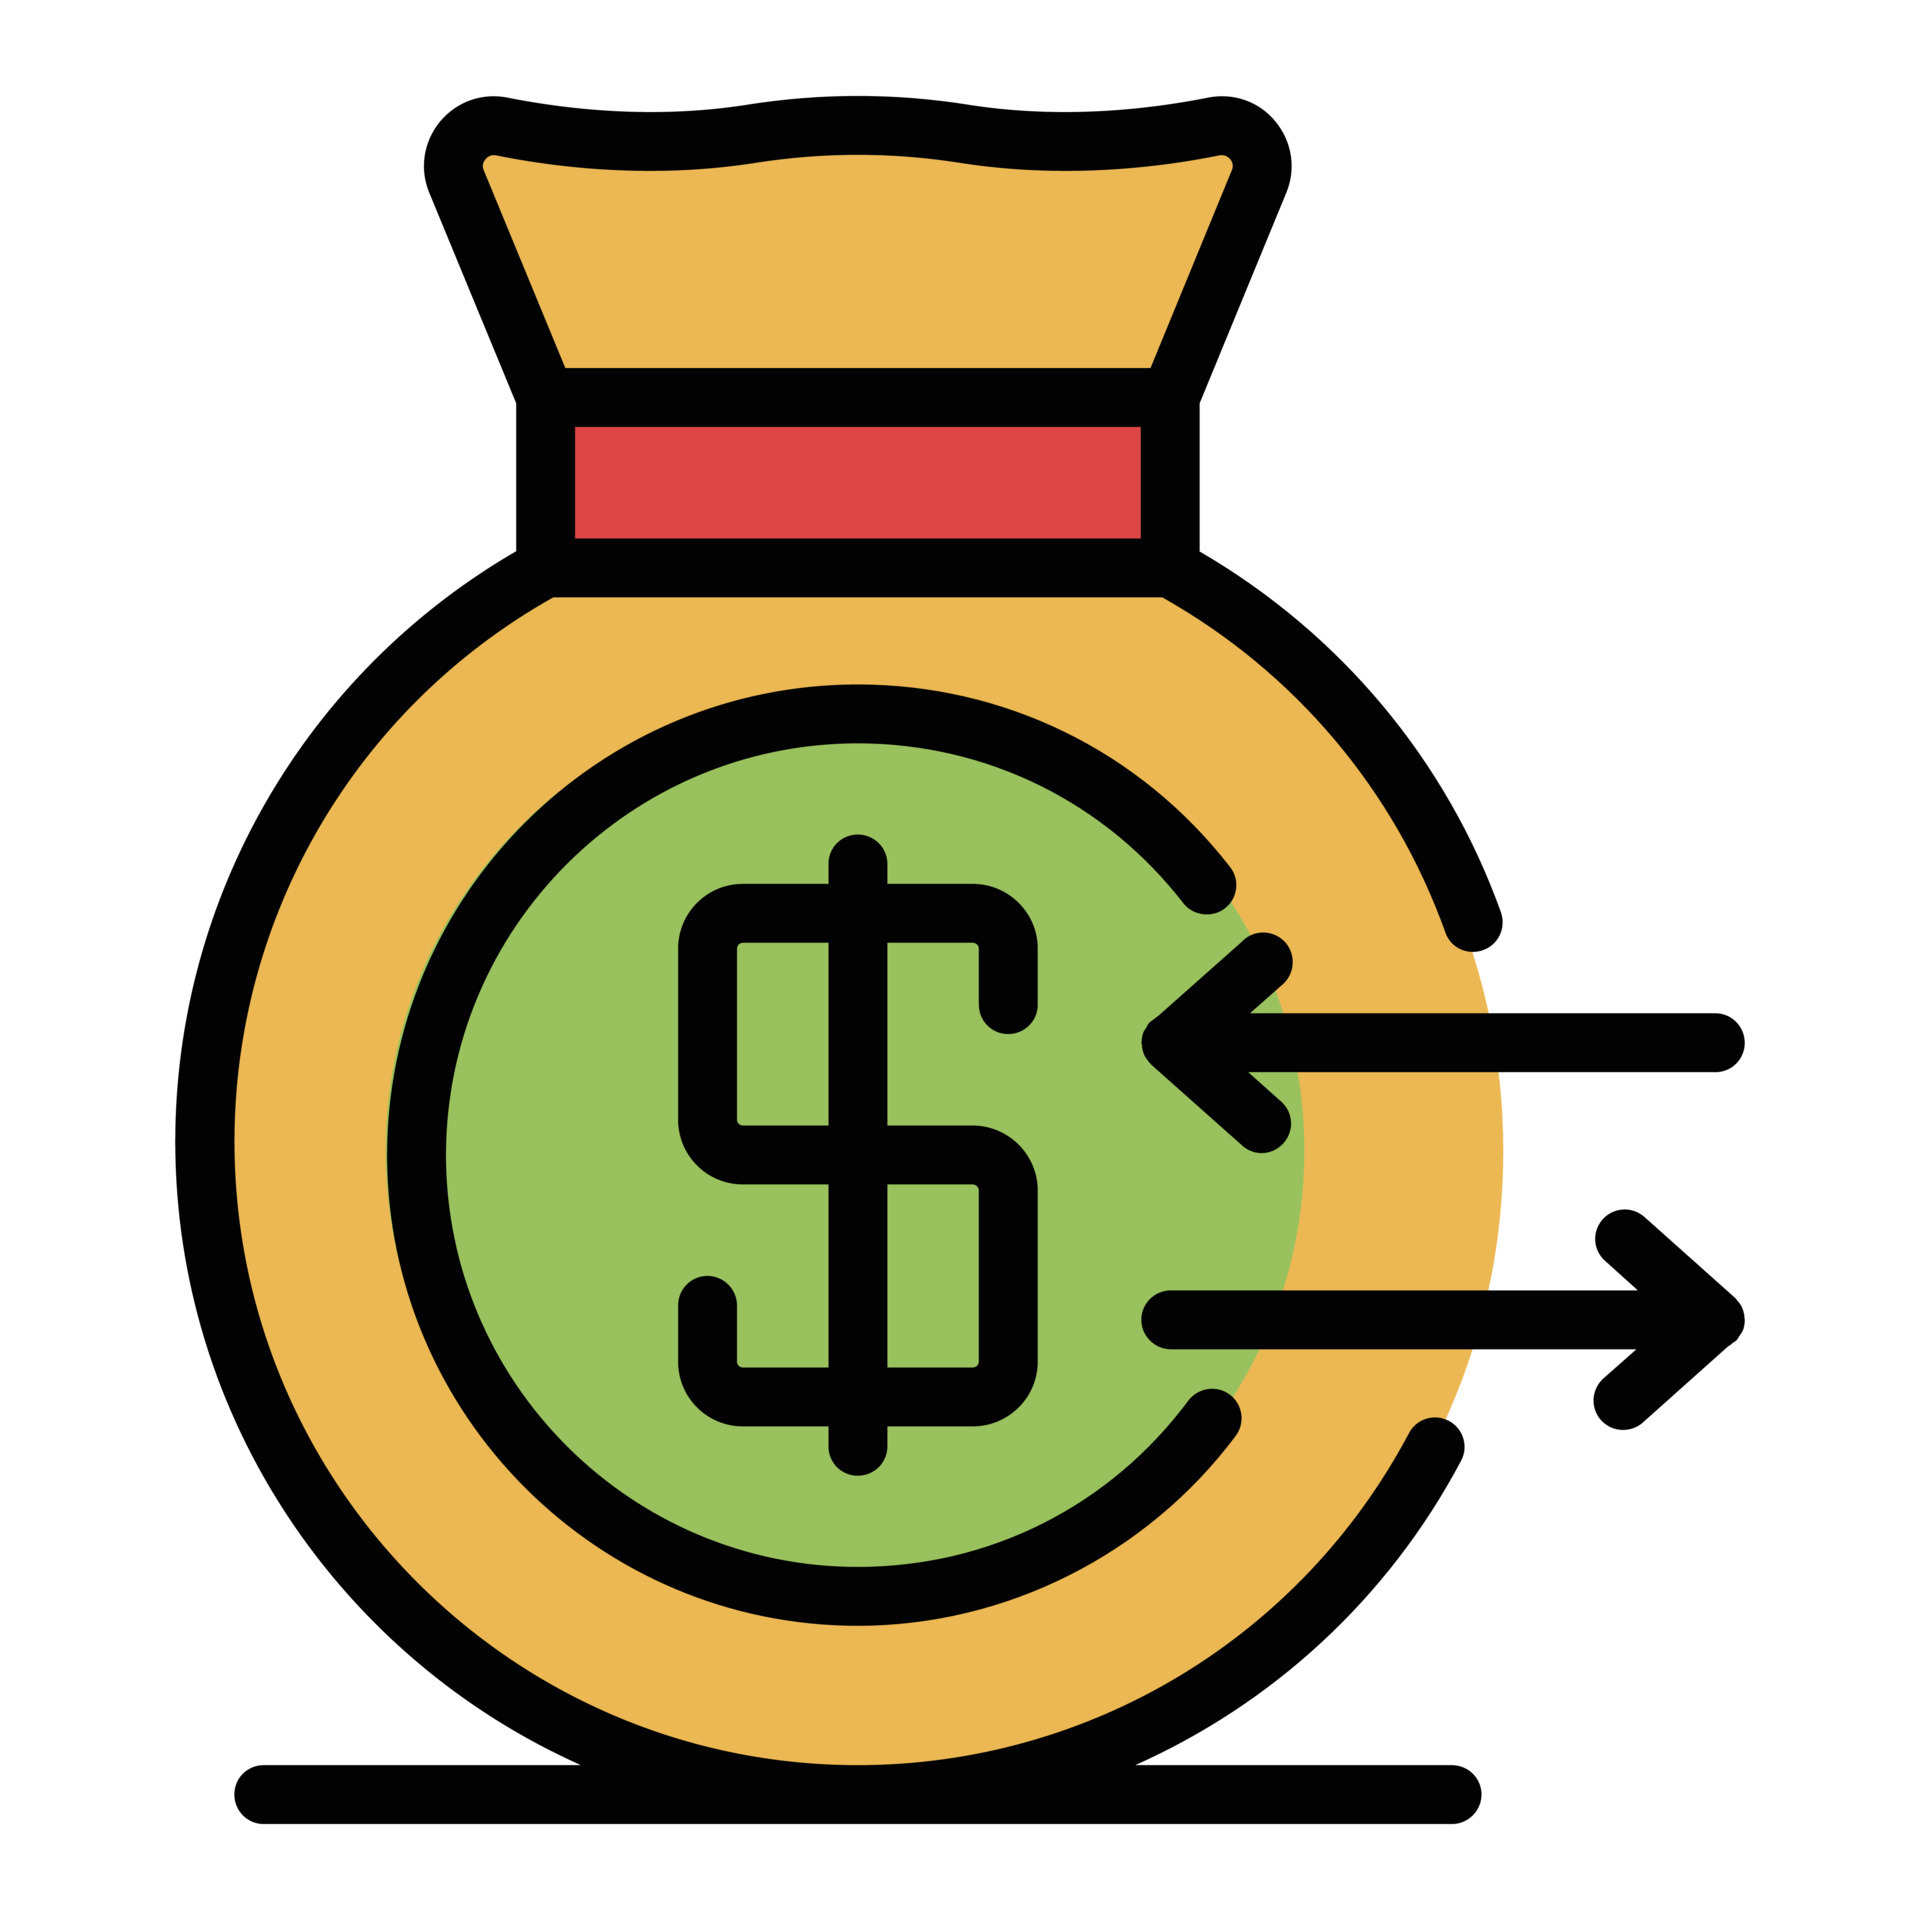 Money Bag Vector Icon Moneybag Flat Simple Cartoon Illustration Isolated  Stock Illustration - Download Image Now - iStock